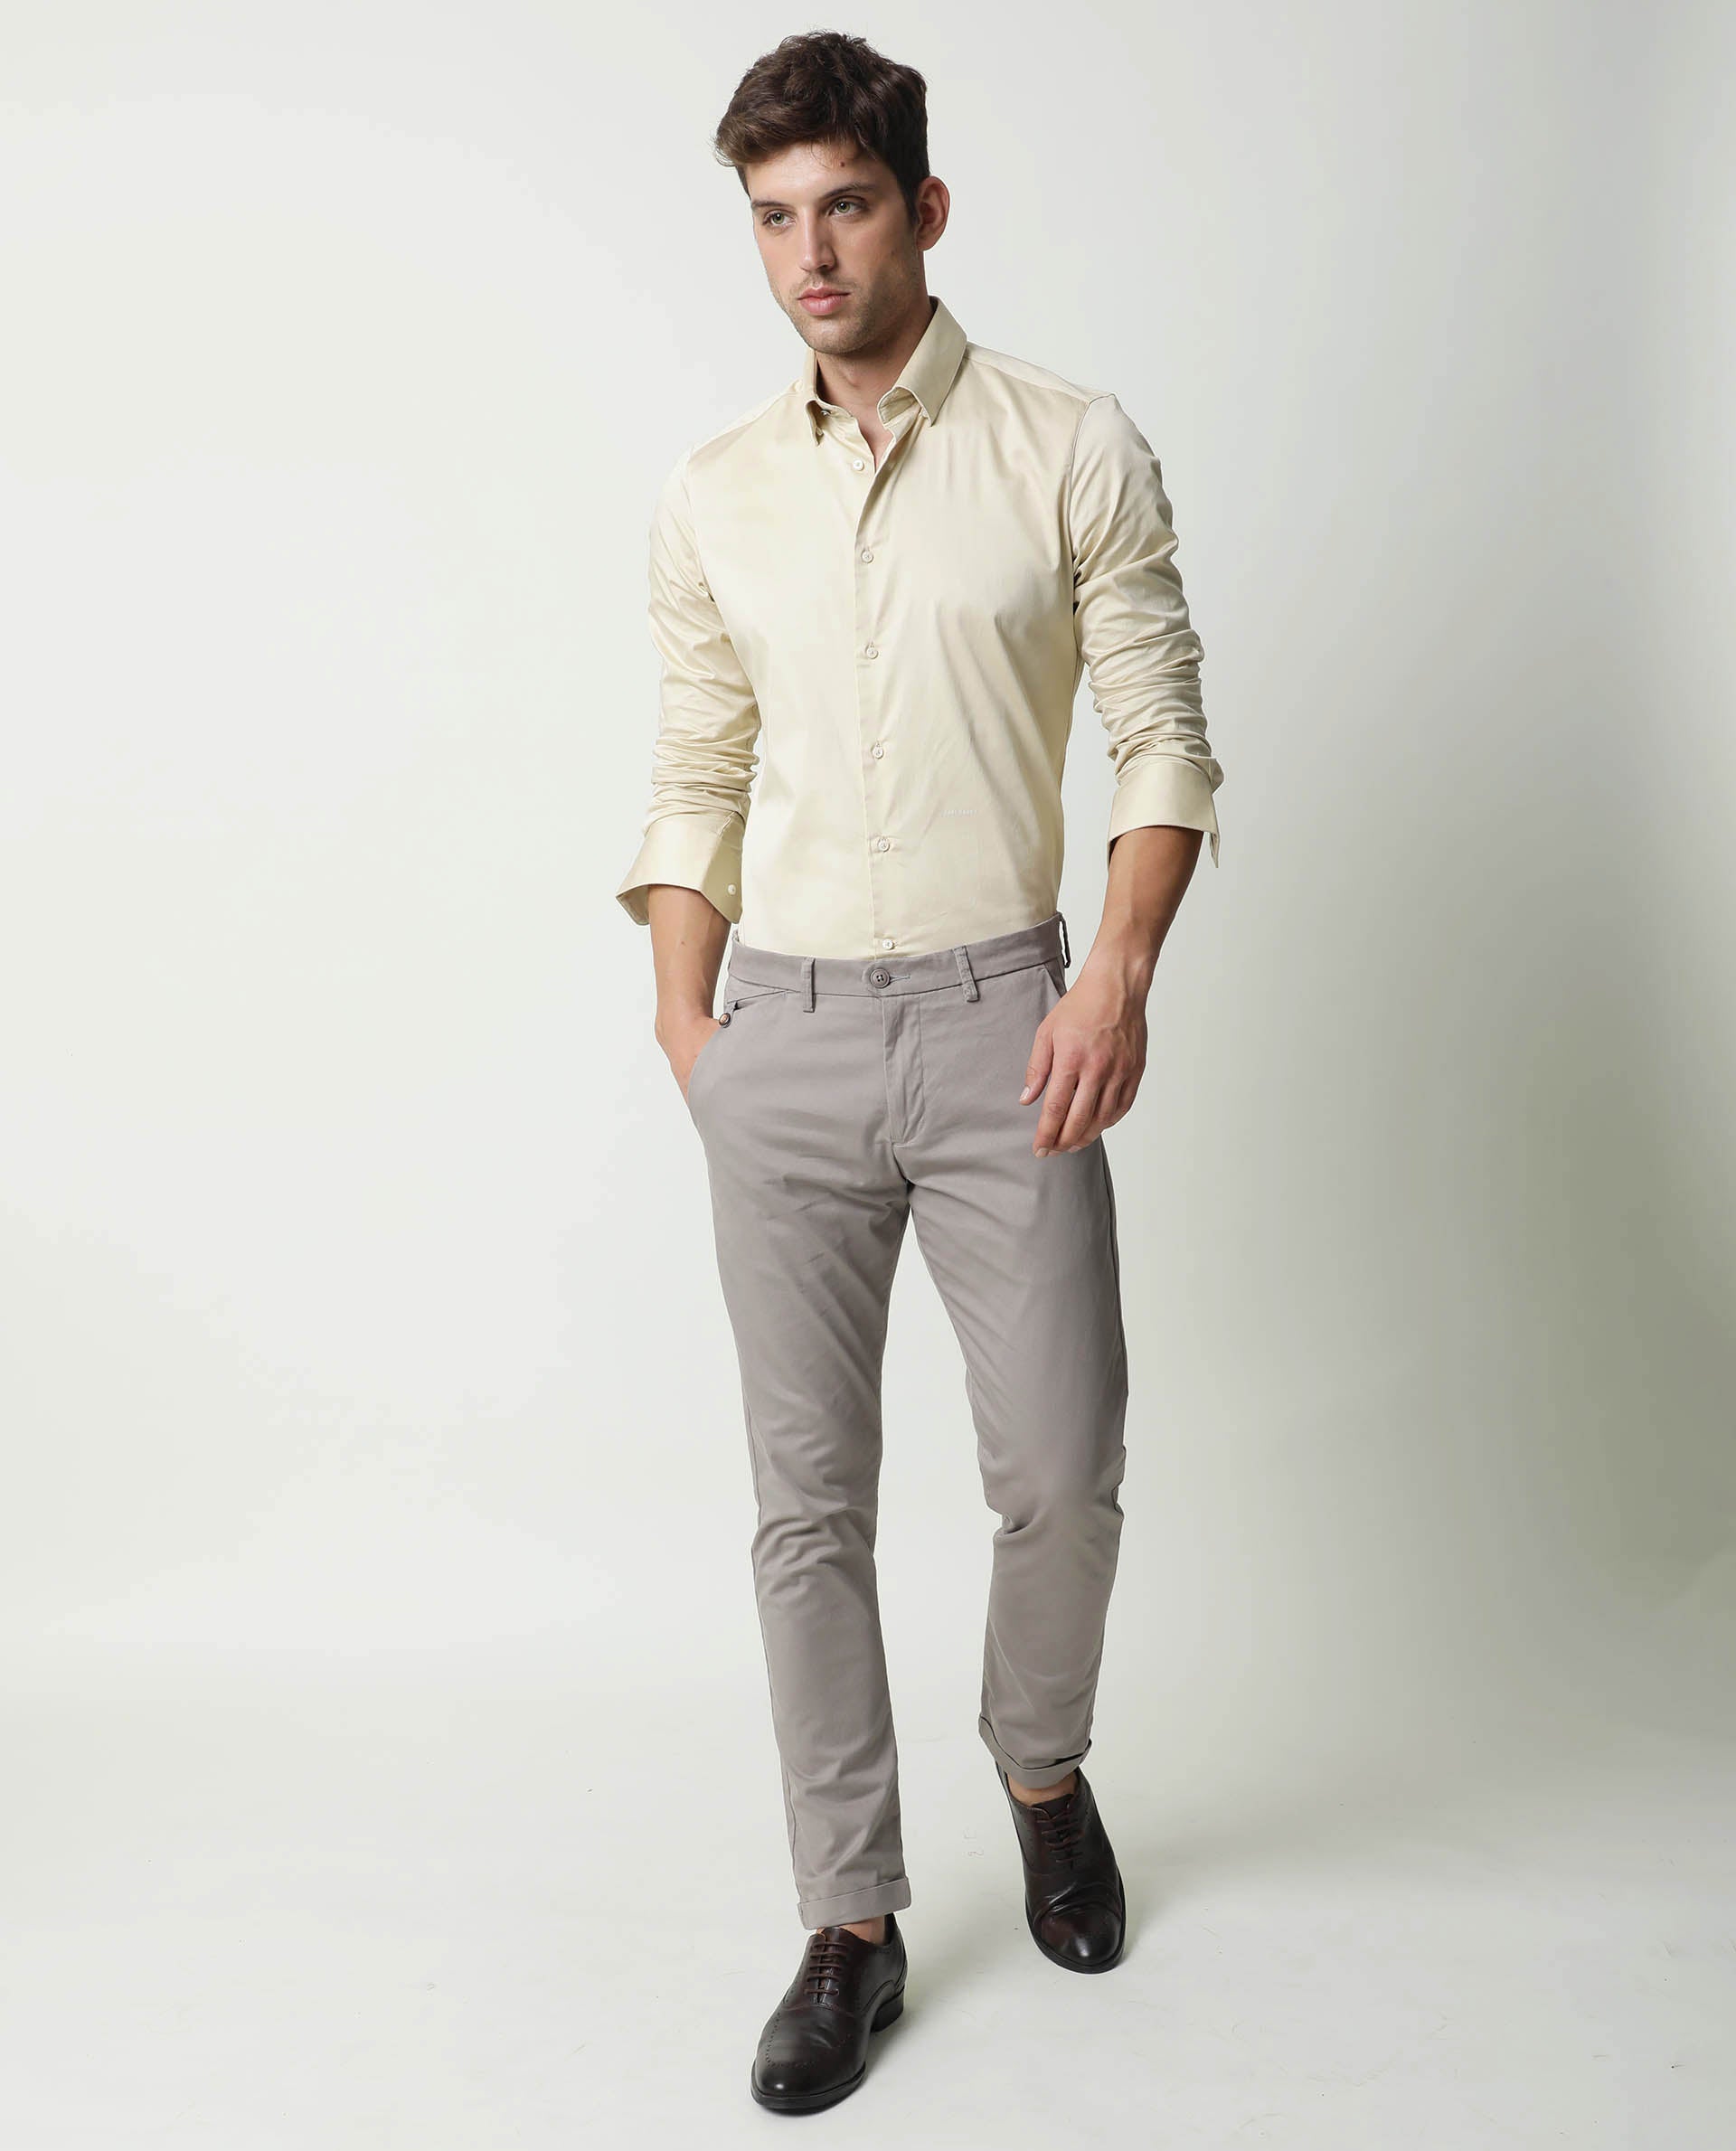 Men khaki pants outfits- 30 ideal ways to style khaki pants | Mens clothing  styles, Mens fashion suits, Mens outfits